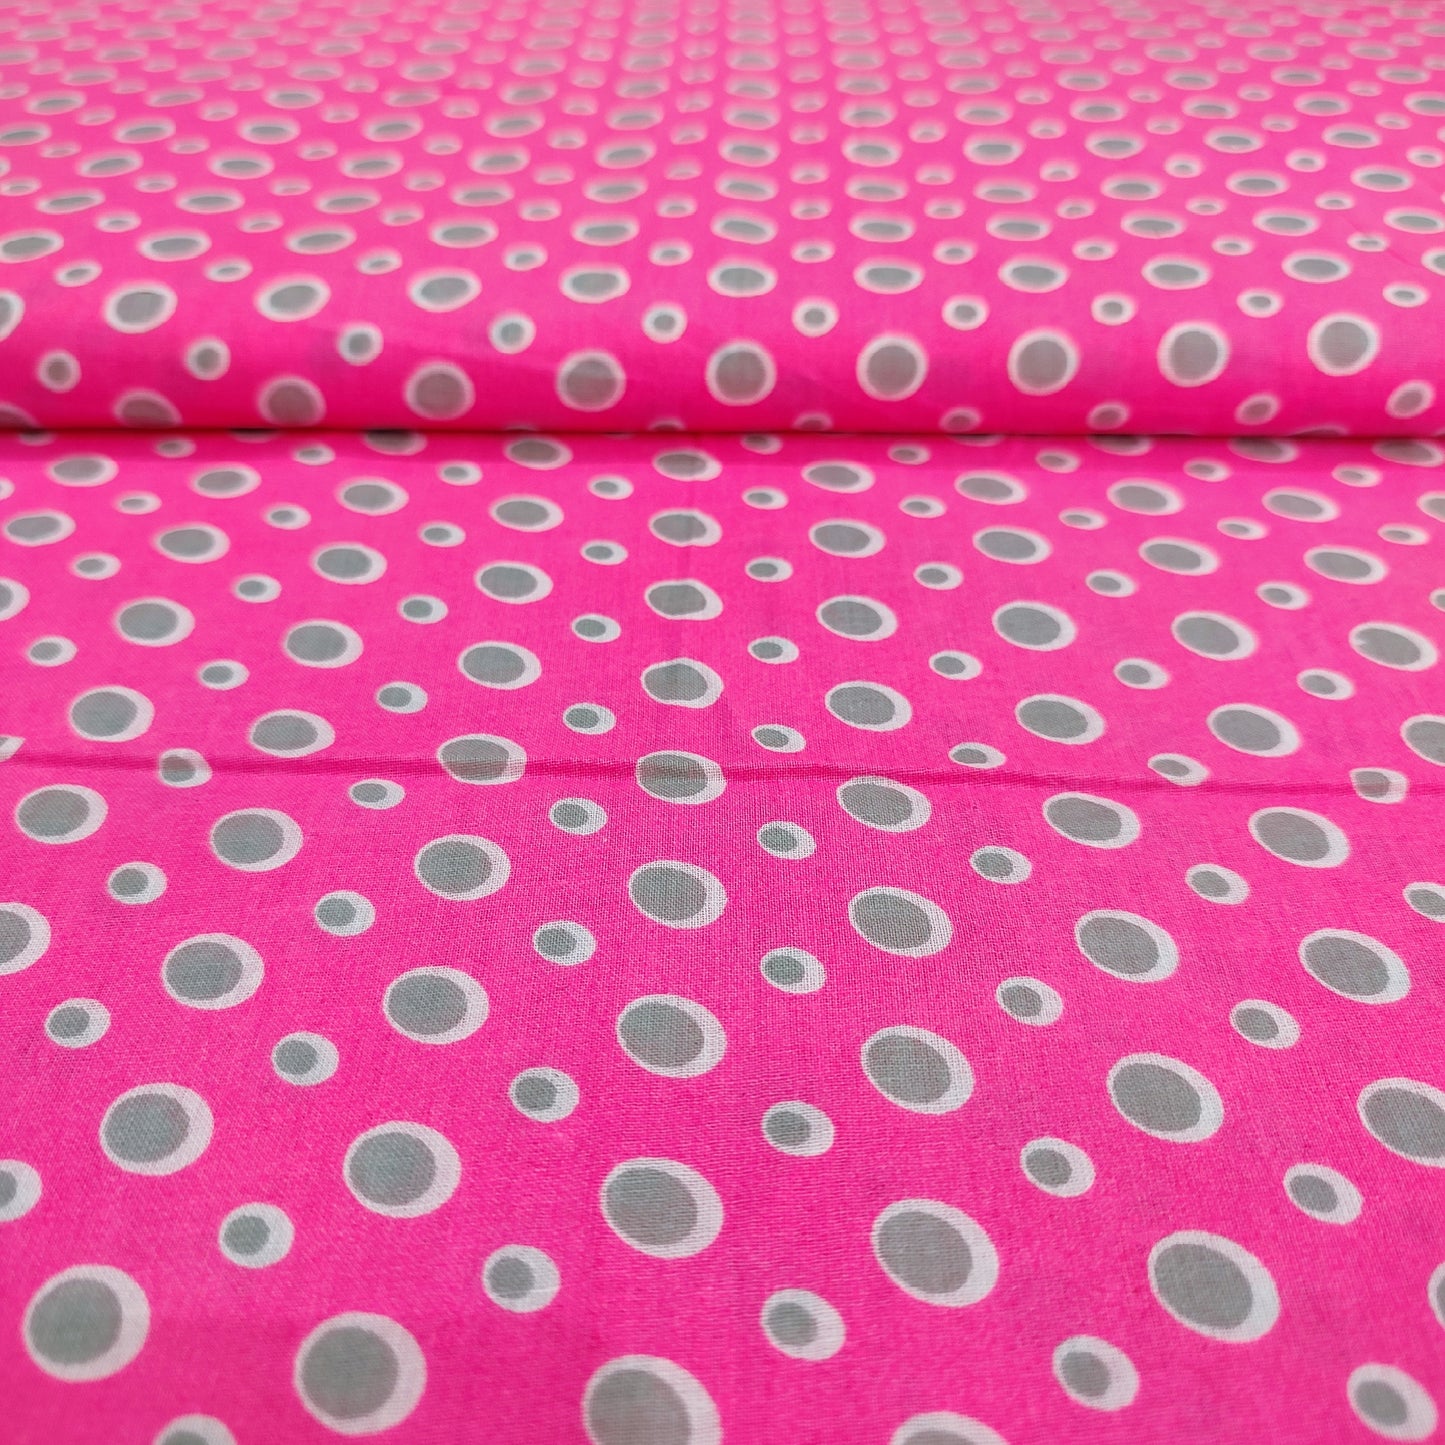 Dotted Neon Pink Cotton Fabric